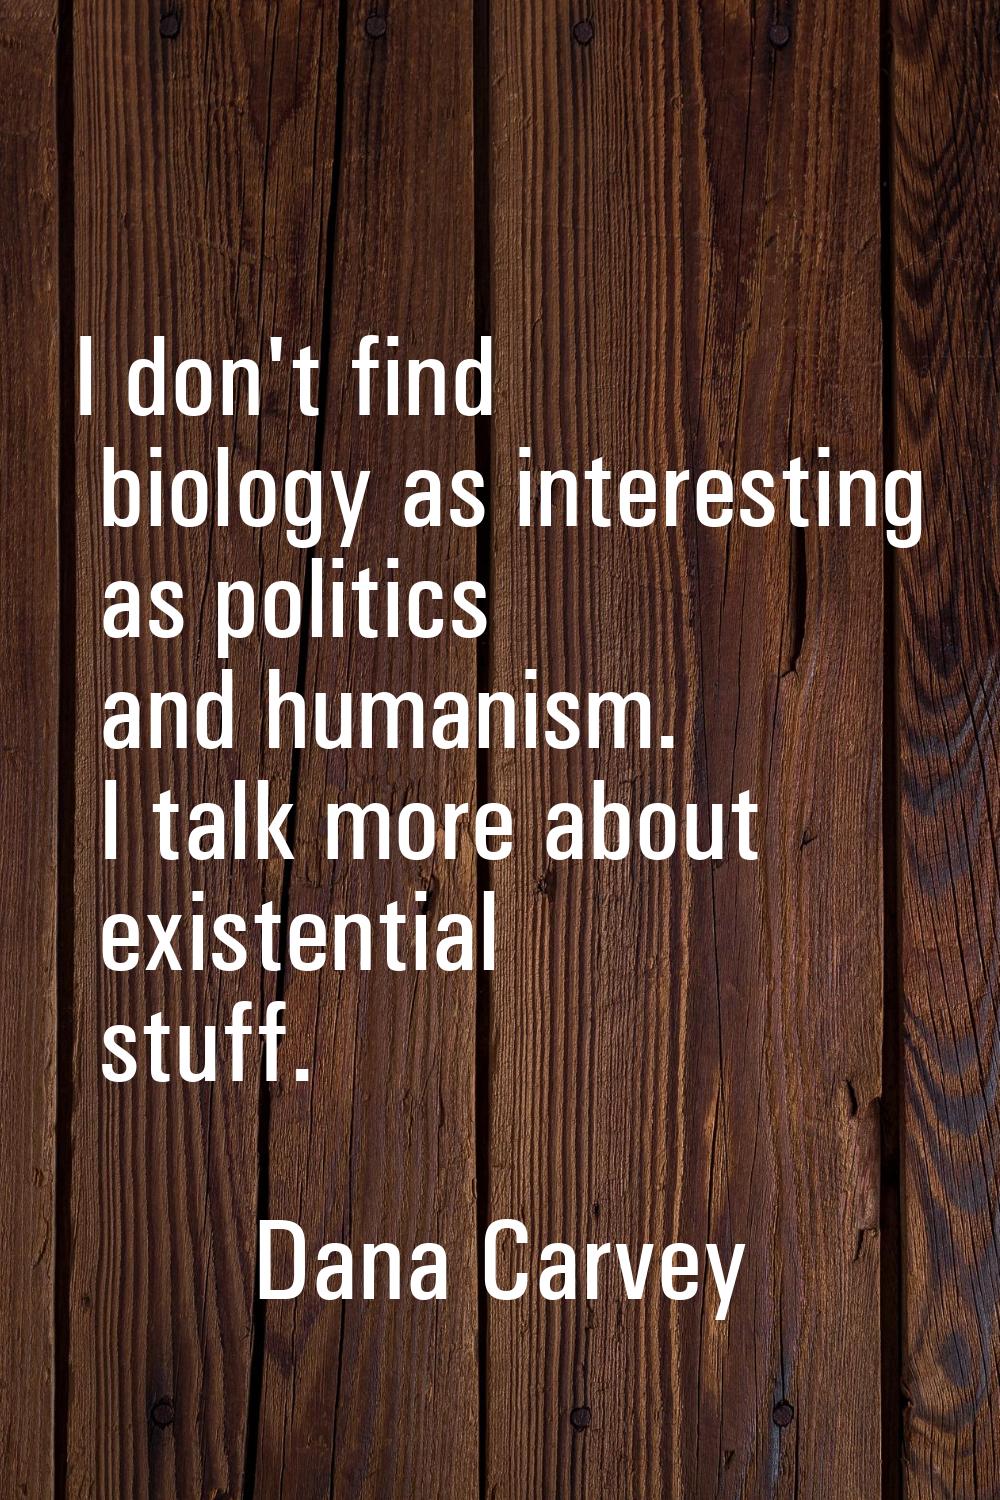 I don't find biology as interesting as politics and humanism. I talk more about existential stuff.